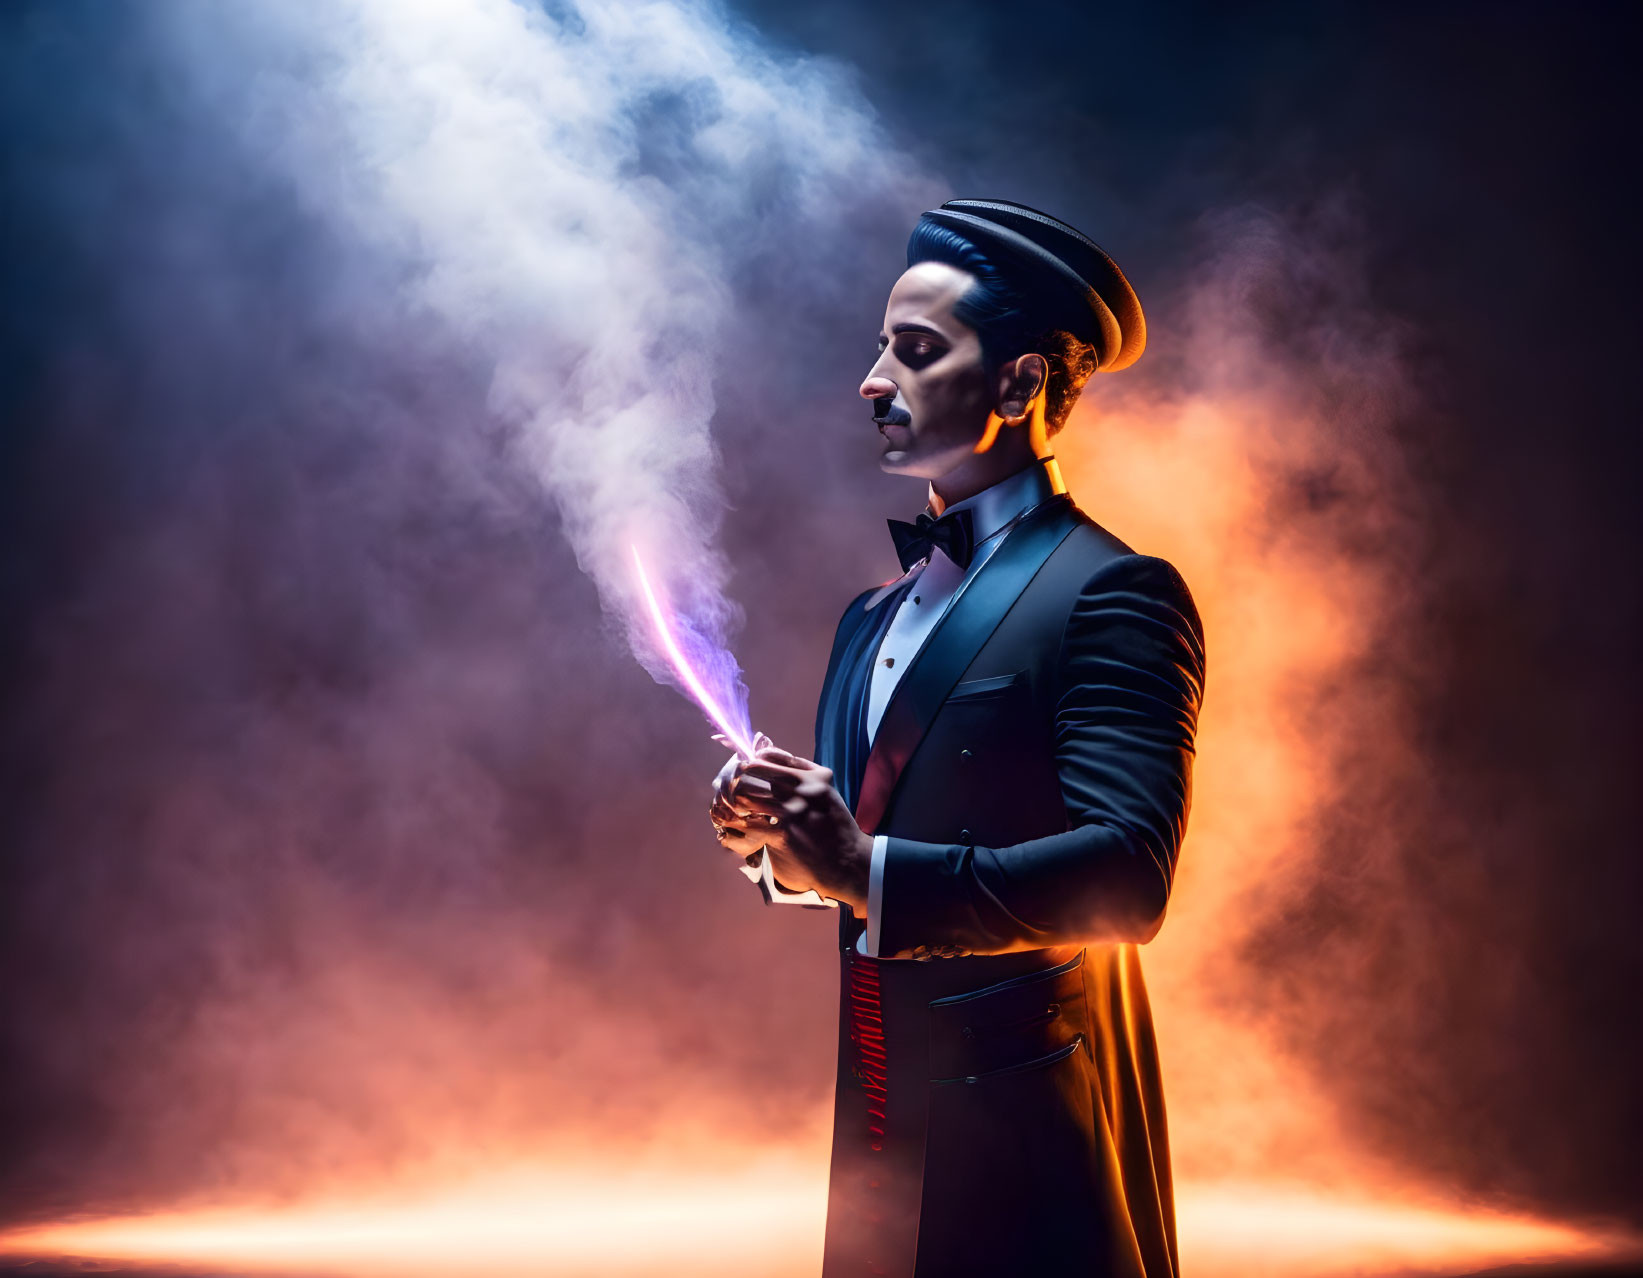 Magician in Tuxedo with Purple Flame and Turban